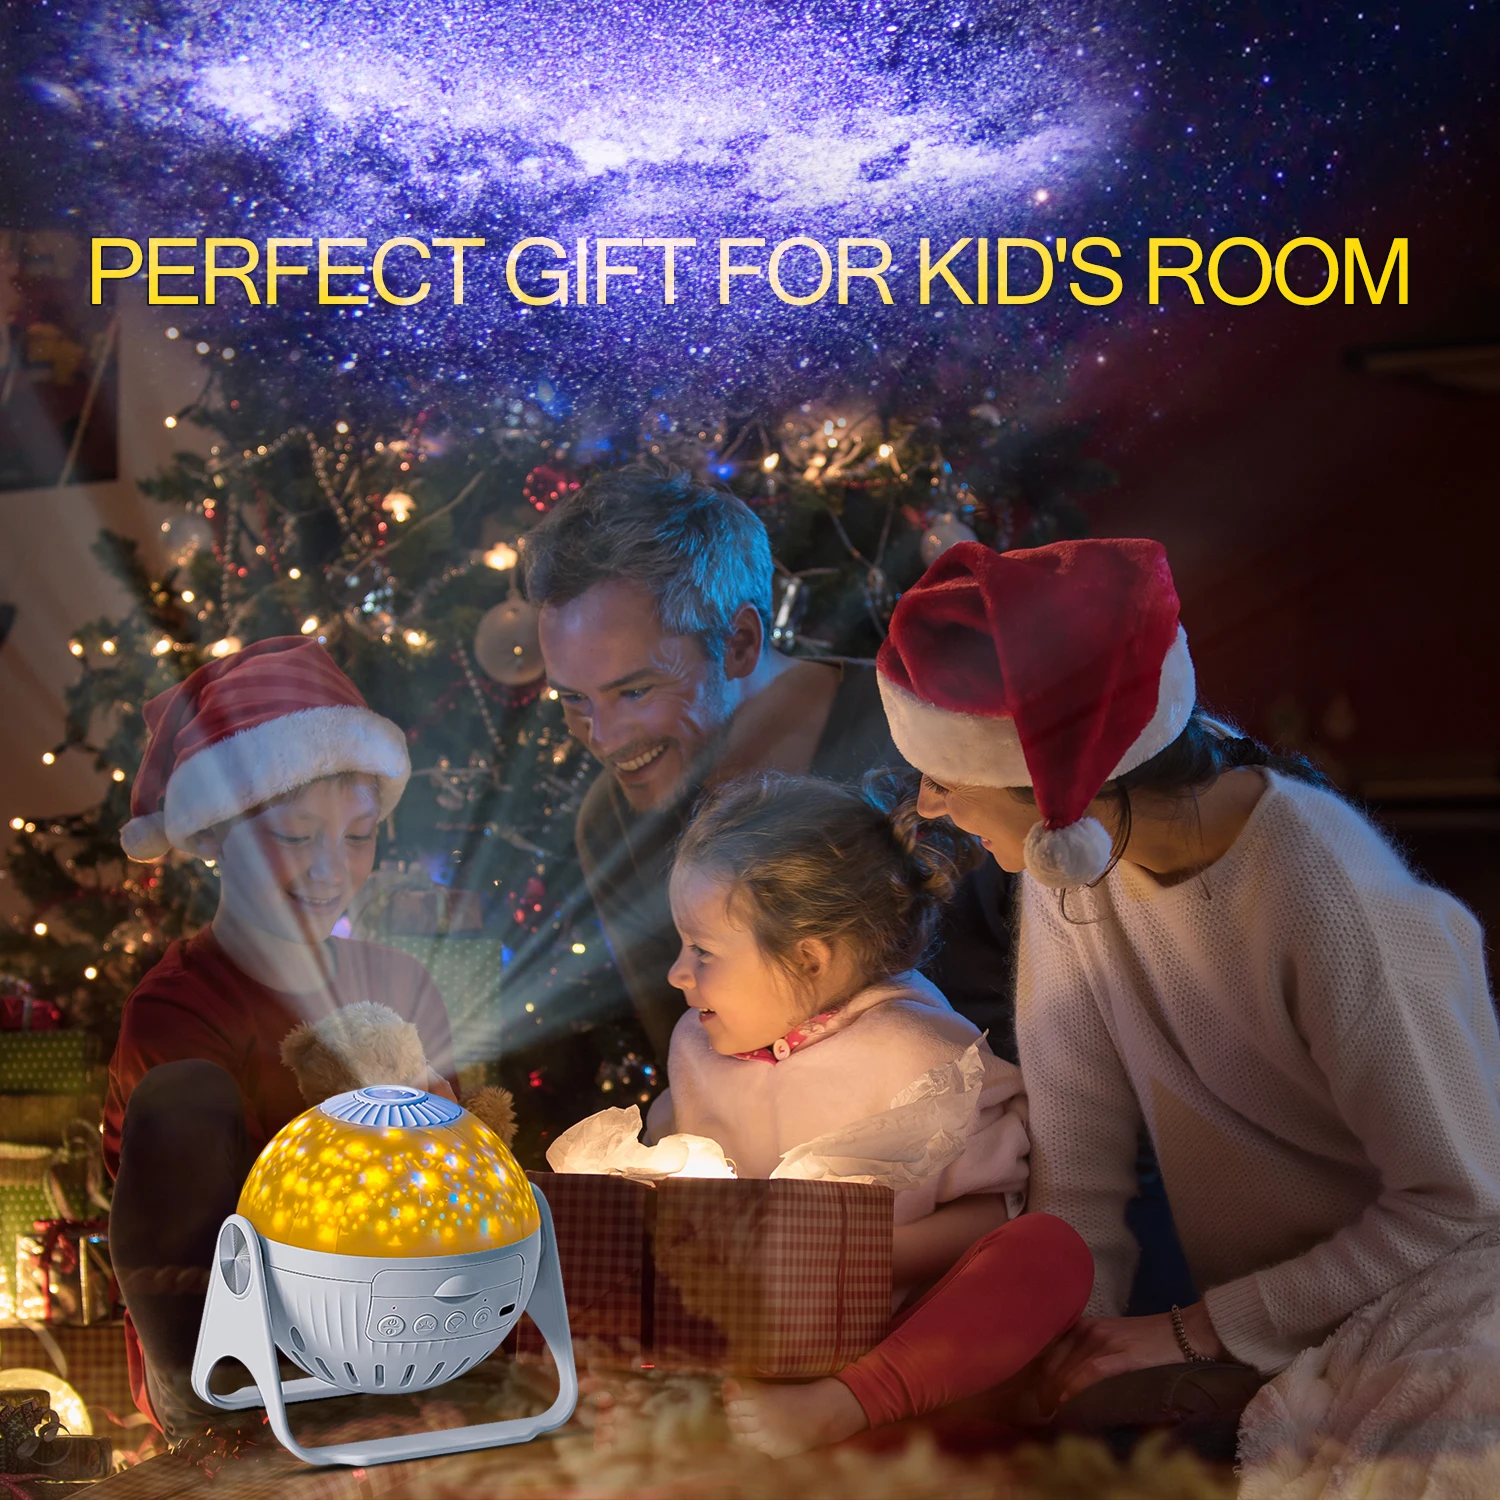 Star Planetarium 7 in 1 360 Adjustable with Planets Nebulae Moon for Kids Room Decor Night Light Ambiance Galaxy Projector